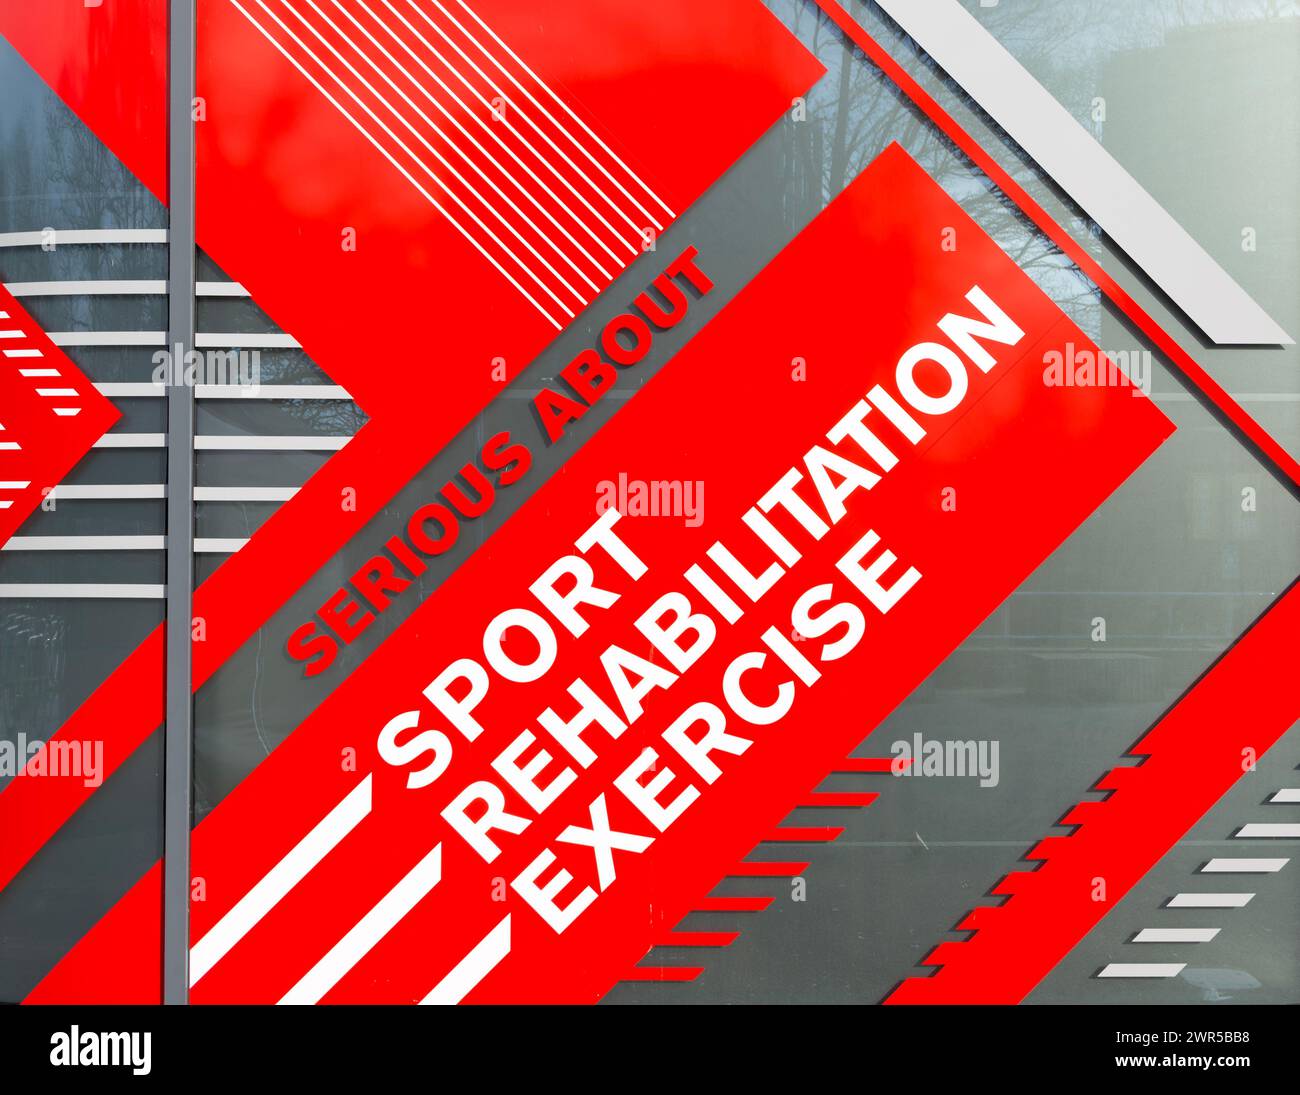 School of Sport, Rehabilitation and Exercise Sciences, University of Essex, Colchester, Essex, England, UK Stock Photo